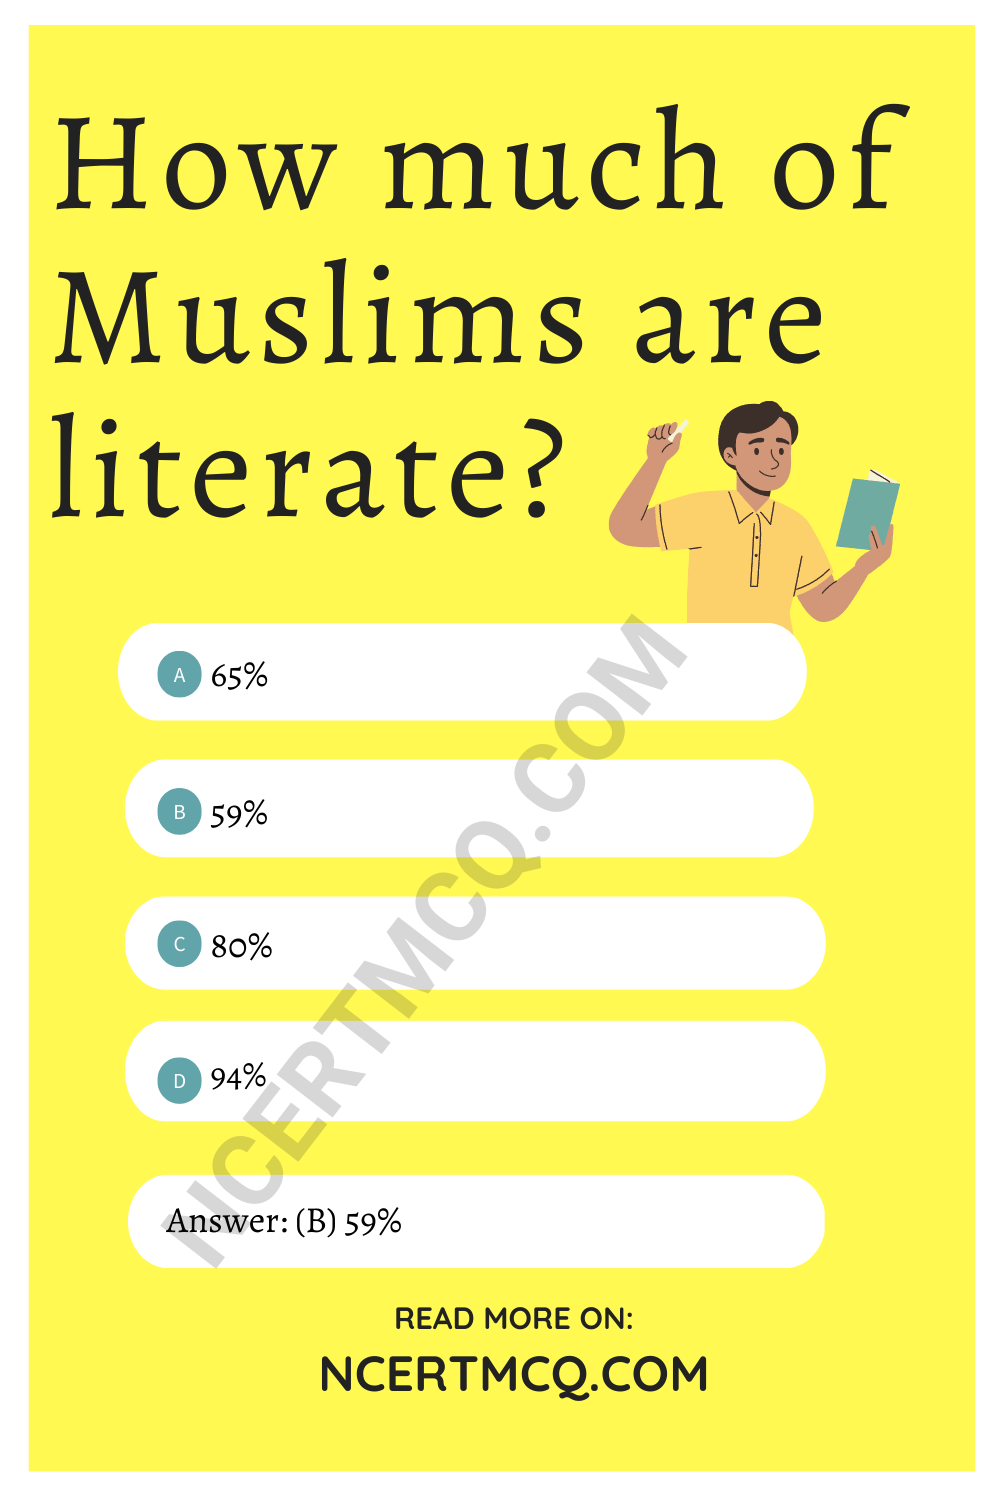 How much of Muslims are literate?